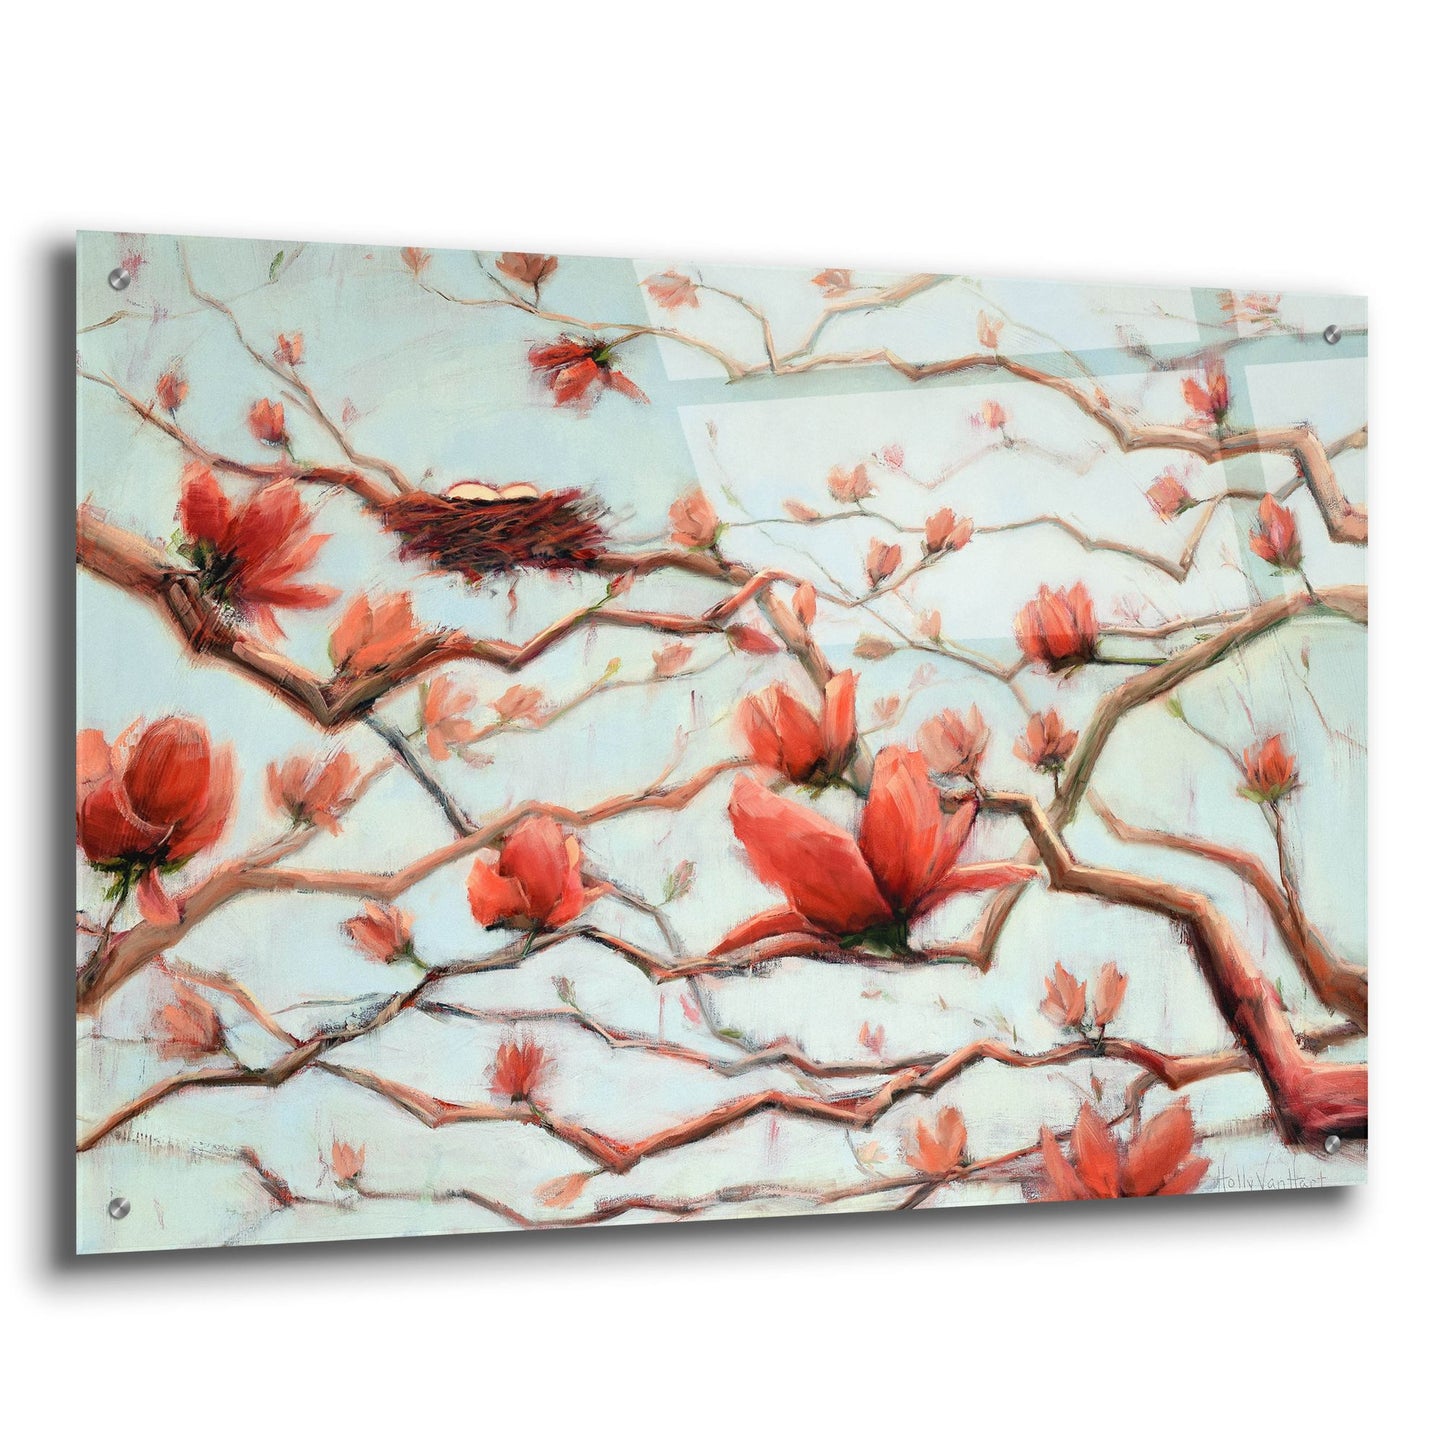 Epic Art 'Possibilities In Full Bloom' by Holly Van Hart, Acrylic Glass Wall Art,36x24